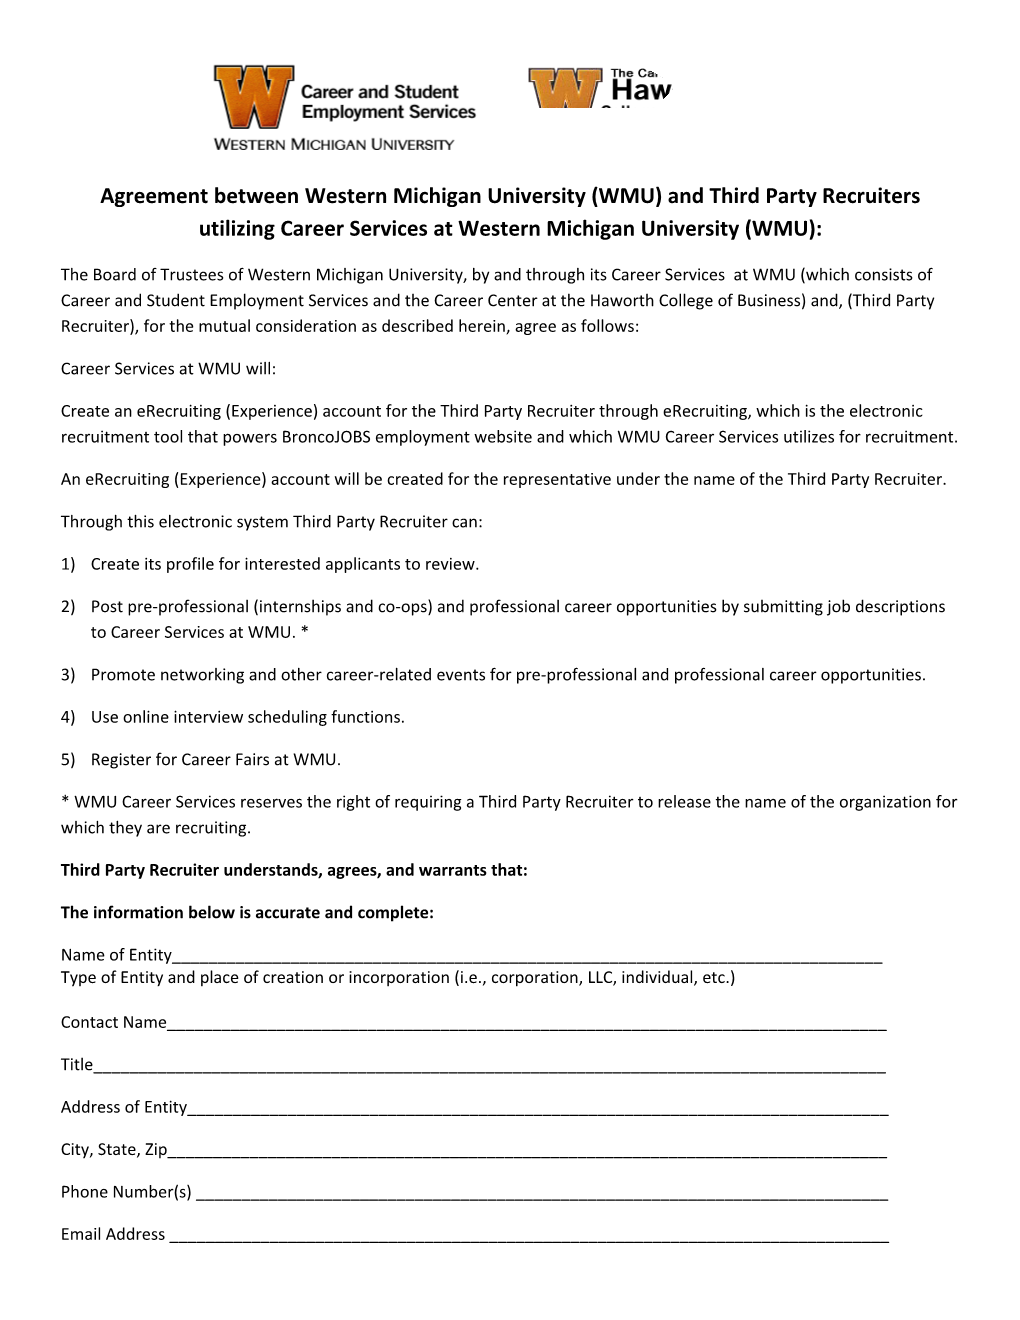 Agreement Between Western Michigan University (WMU) and Third Party Recruiters Utilizing